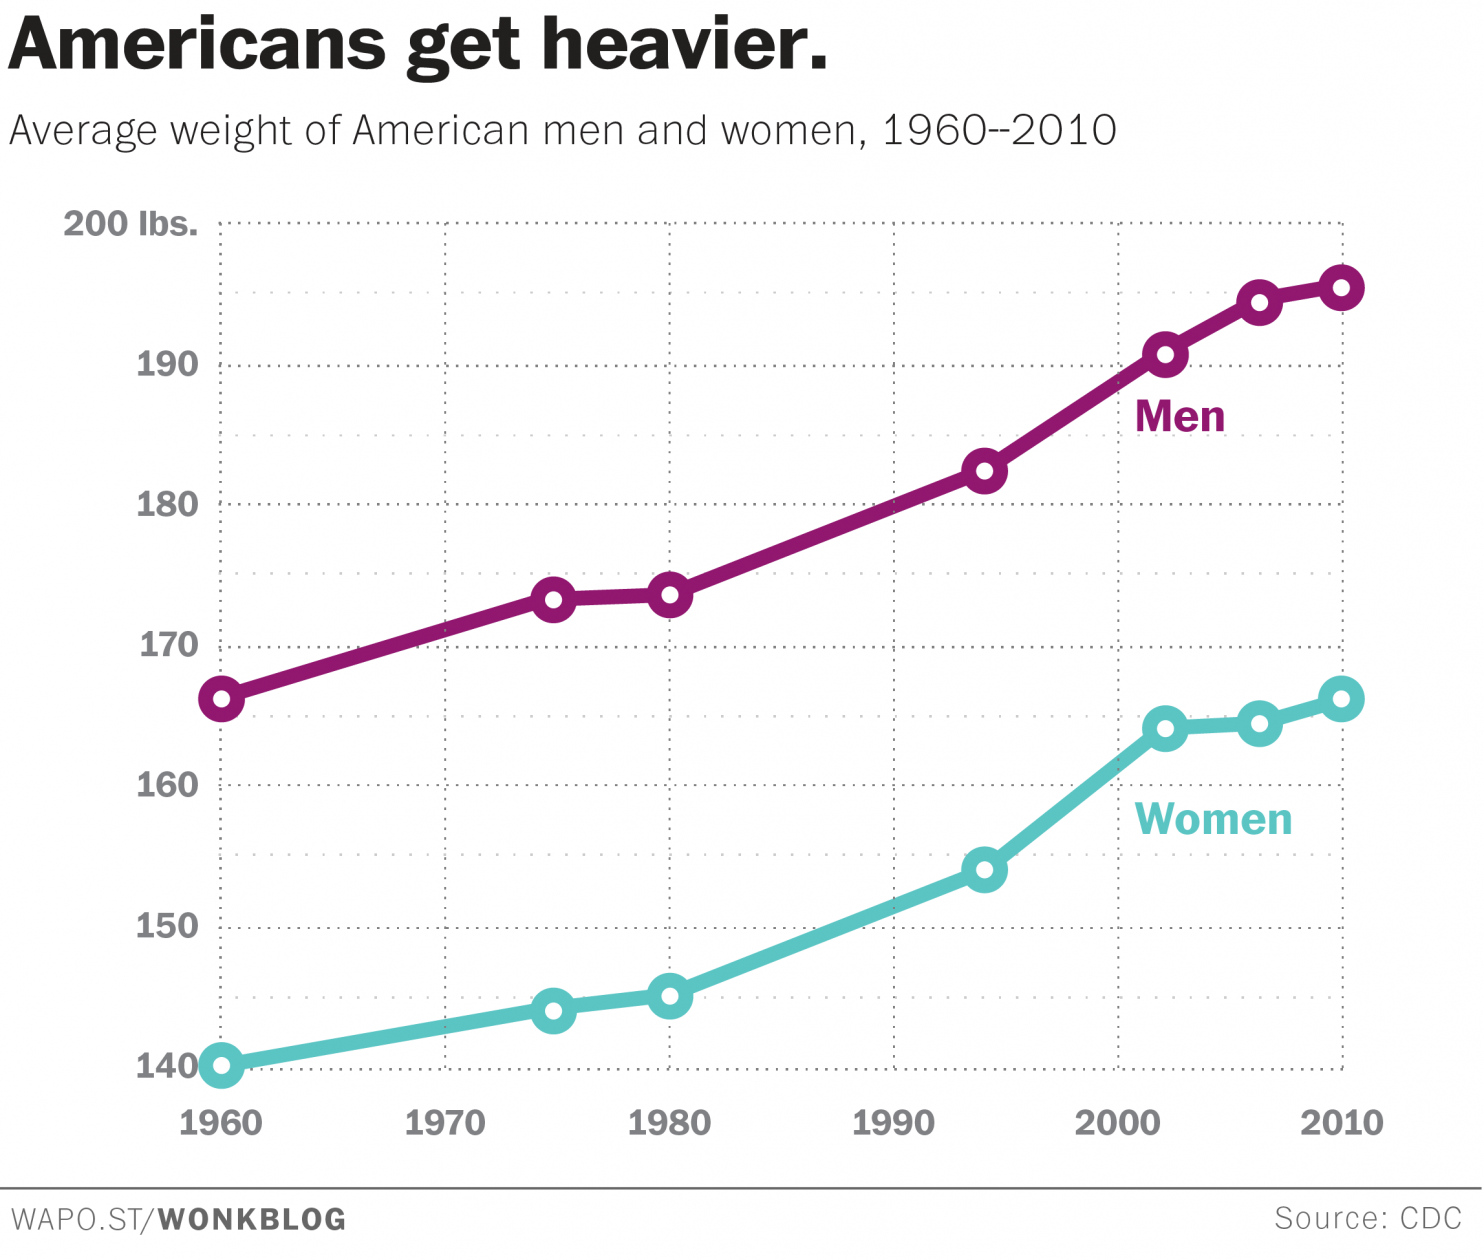 The Rural Blog: Since 1960, average U.S. man weighs 17.6% more; women